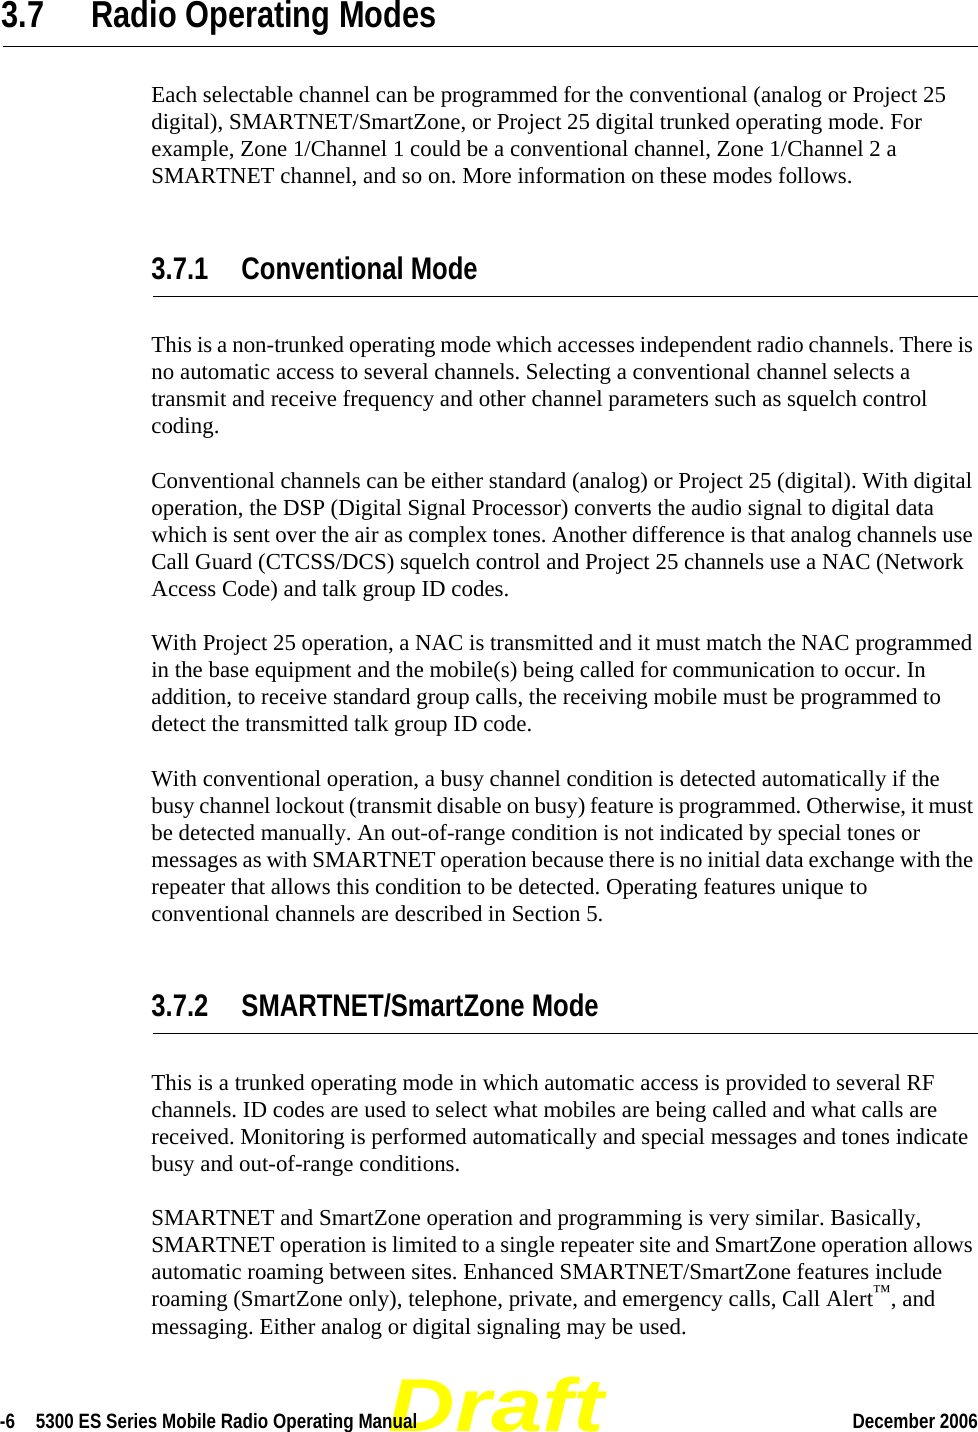 Draft-6  5300 ES Series Mobile Radio Operating Manual December 2006 3.7 Radio Operating ModesEach selectable channel can be programmed for the conventional (analog or Project 25 digital), SMARTNET/SmartZone, or Project 25 digital trunked operating mode. For example, Zone 1/Channel 1 could be a conventional channel, Zone 1/Channel 2 a SMARTNET channel, and so on. More information on these modes follows.3.7.1 Conventional ModeThis is a non-trunked operating mode which accesses independent radio channels. There is no automatic access to several channels. Selecting a conventional channel selects a transmit and receive frequency and other channel parameters such as squelch control coding.Conventional channels can be either standard (analog) or Project 25 (digital). With digital operation, the DSP (Digital Signal Processor) converts the audio signal to digital data which is sent over the air as complex tones. Another difference is that analog channels use Call Guard (CTCSS/DCS) squelch control and Project 25 channels use a NAC (Network Access Code) and talk group ID codes.With Project 25 operation, a NAC is transmitted and it must match the NAC programmed in the base equipment and the mobile(s) being called for communication to occur. In addition, to receive standard group calls, the receiving mobile must be programmed to detect the transmitted talk group ID code.With conventional operation, a busy channel condition is detected automatically if the busy channel lockout (transmit disable on busy) feature is programmed. Otherwise, it must be detected manually. An out-of-range condition is not indicated by special tones or messages as with SMARTNET operation because there is no initial data exchange with the repeater that allows this condition to be detected. Operating features unique to conventional channels are described in Section 5.3.7.2 SMARTNET/SmartZone ModeThis is a trunked operating mode in which automatic access is provided to several RF channels. ID codes are used to select what mobiles are being called and what calls are received. Monitoring is performed automatically and special messages and tones indicate busy and out-of-range conditions.SMARTNET and SmartZone operation and programming is very similar. Basically, SMARTNET operation is limited to a single repeater site and SmartZone operation allows automatic roaming between sites. Enhanced SMARTNET/SmartZone features include roaming (SmartZone only), telephone, private, and emergency calls, Call Alert™, and messaging. Either analog or digital signaling may be used.